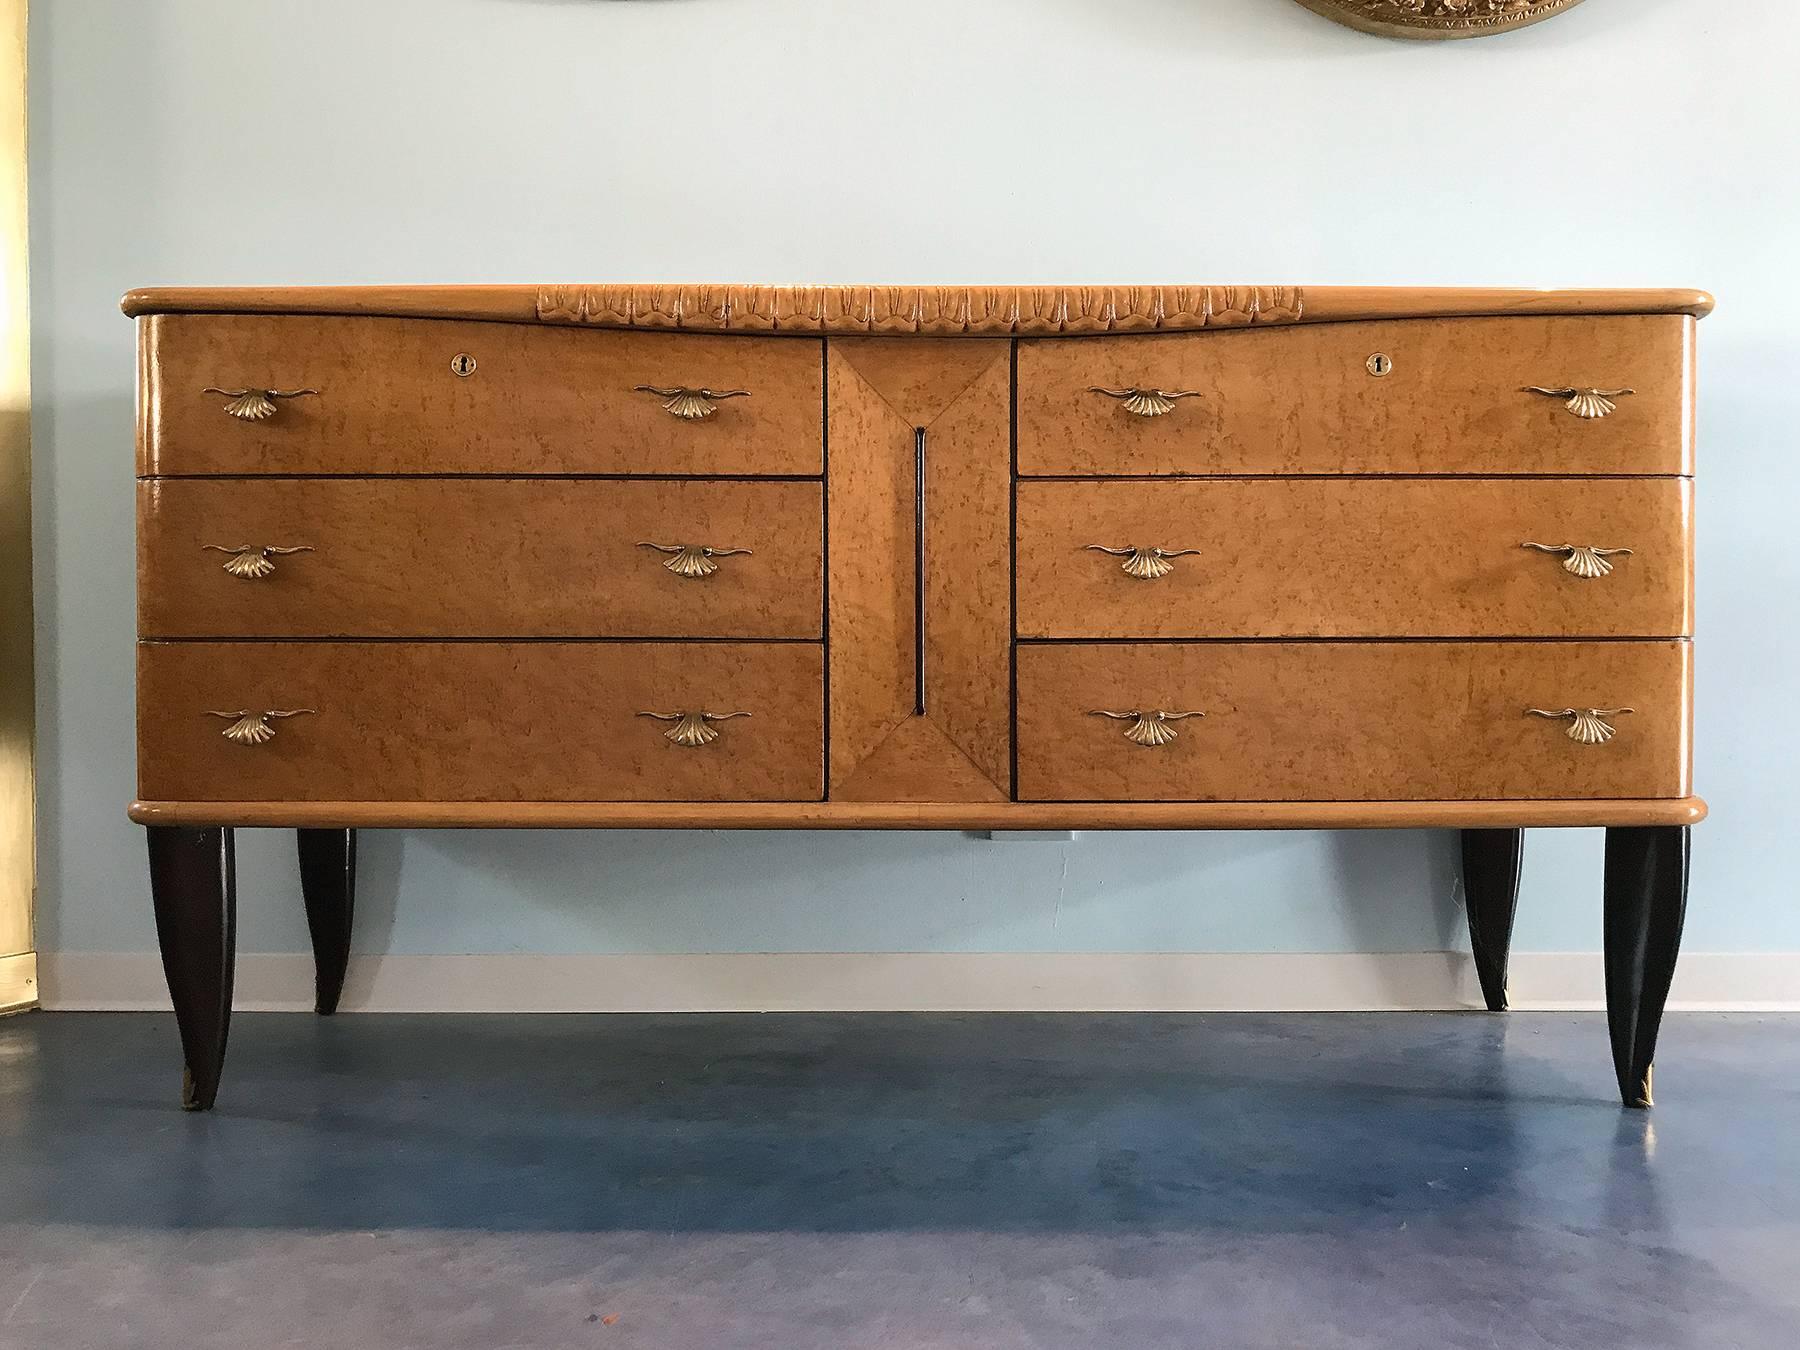 Italian Art Deco chest of drawers with a splendid maple feather on the front, sides and top in rosewood.
Six drawers, black lacquered legs with sabots in brass on the ends.

If requested, we'll provide the CITES certificate as regular export permit